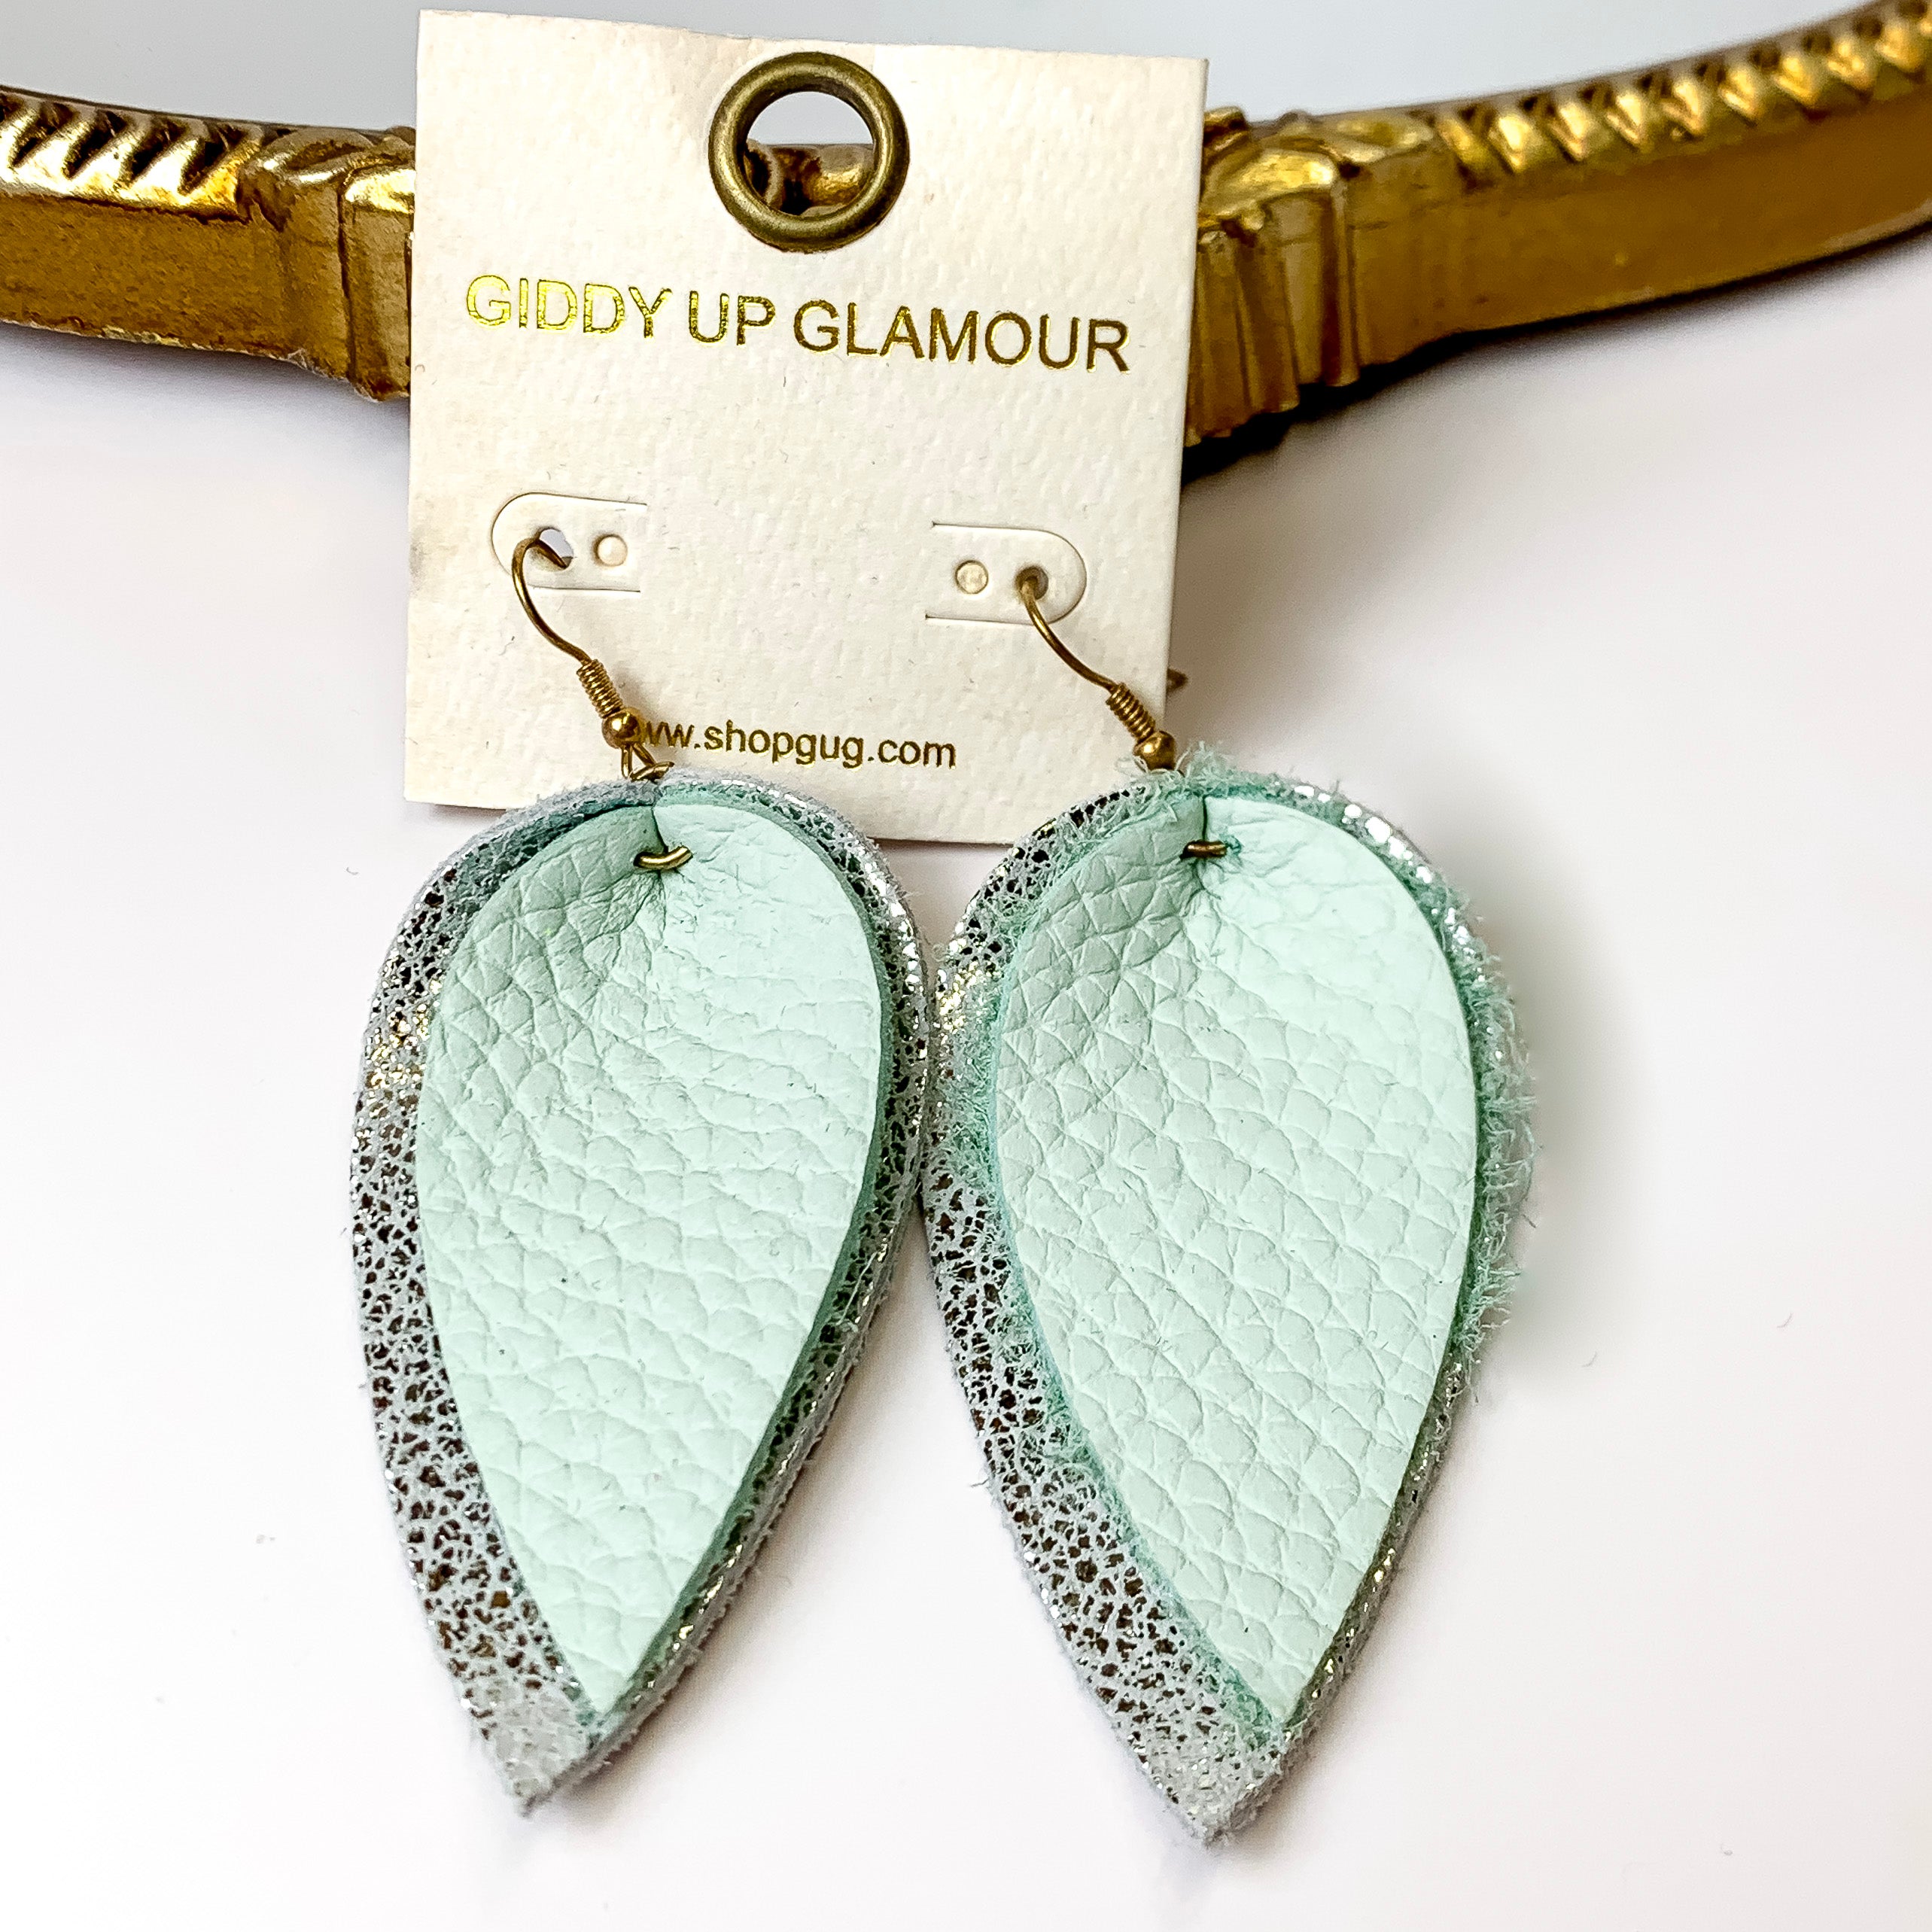 Two-Toned Light As a Feather Faux Leather Earrings in Mint Green - Giddy Up Glamour Boutique